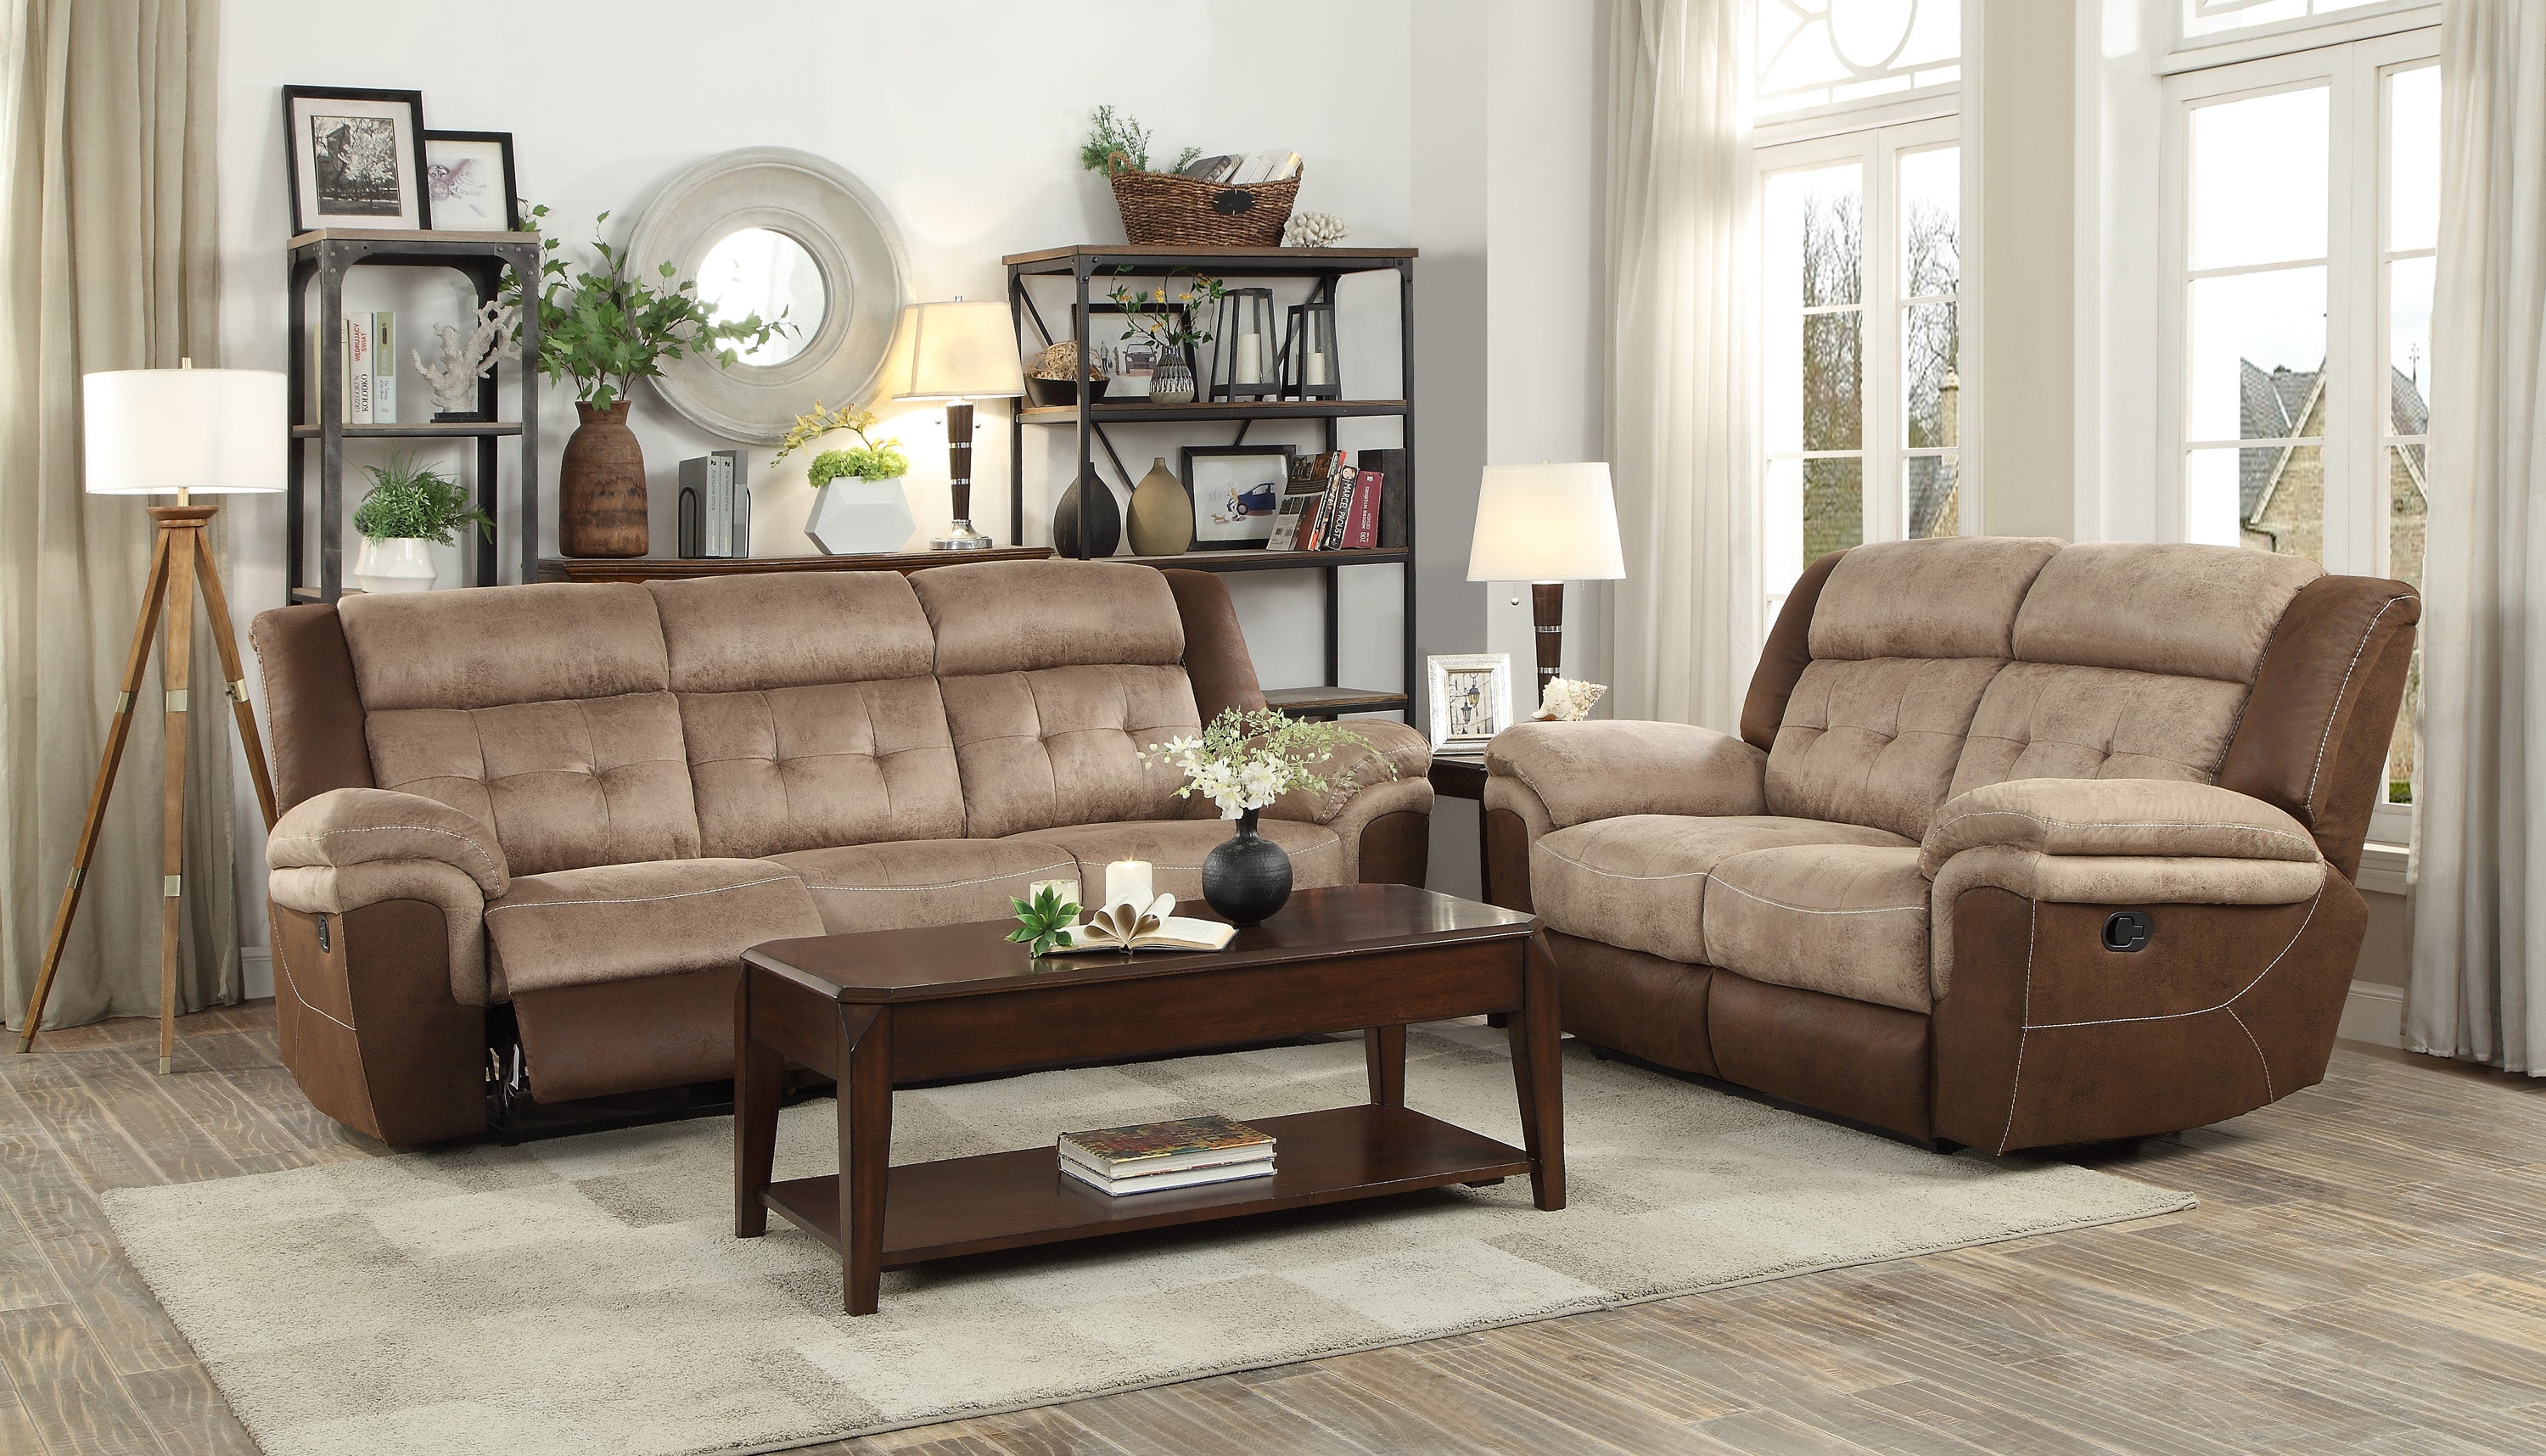 Chai Brown Microfiber Double Reclining Living Room Set 9980HomeleganceLiving Room SetPlush Seating Is Combined With Soft Contemporary Styling That Create The Bold Look Of The Chai Collection The Two Tone Brown Fabric